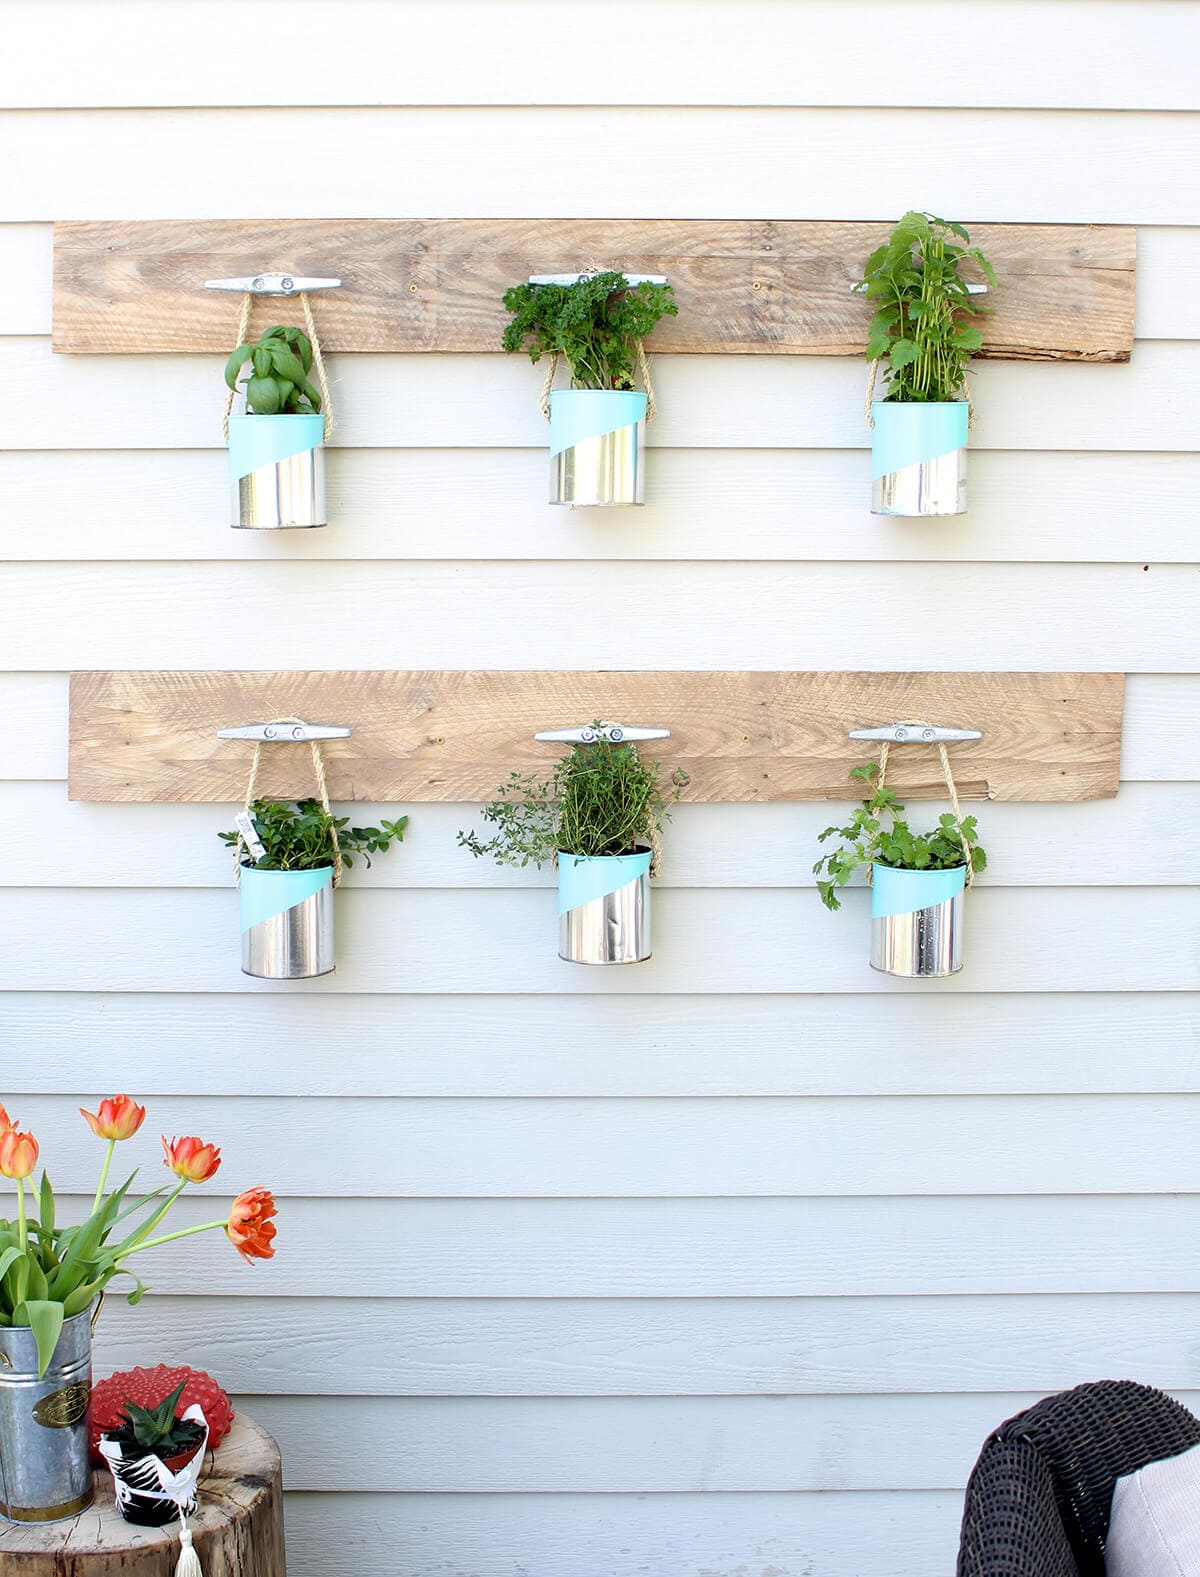 23 impressive hanging vases and planters ideas to decorate your boring wall - 81